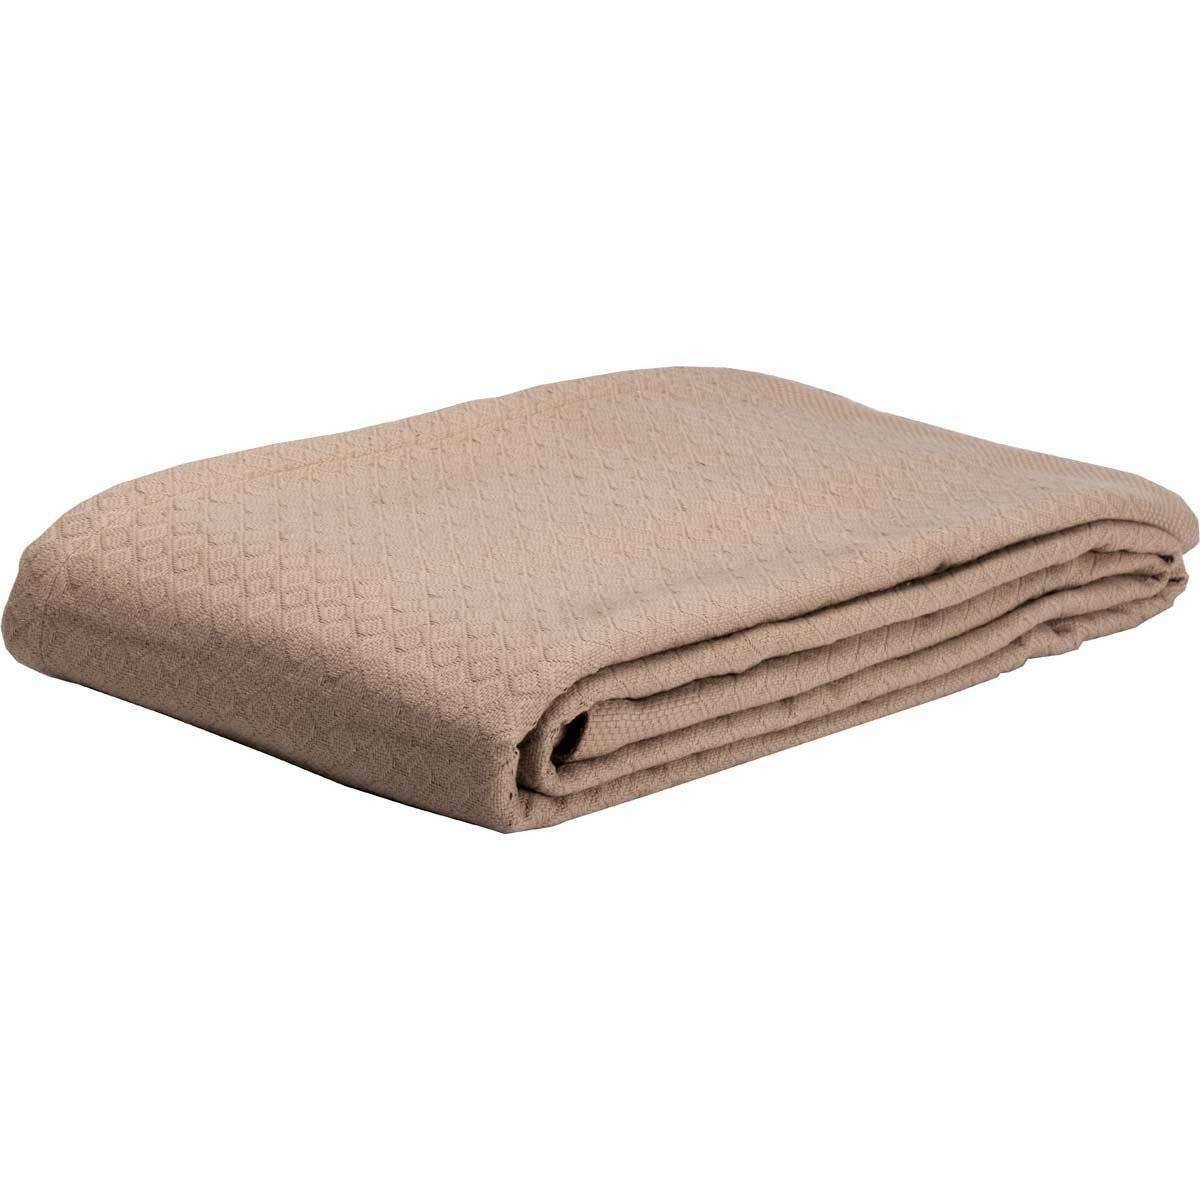 Serenity Tan Cotton Woven Blanket VHC Brands folded